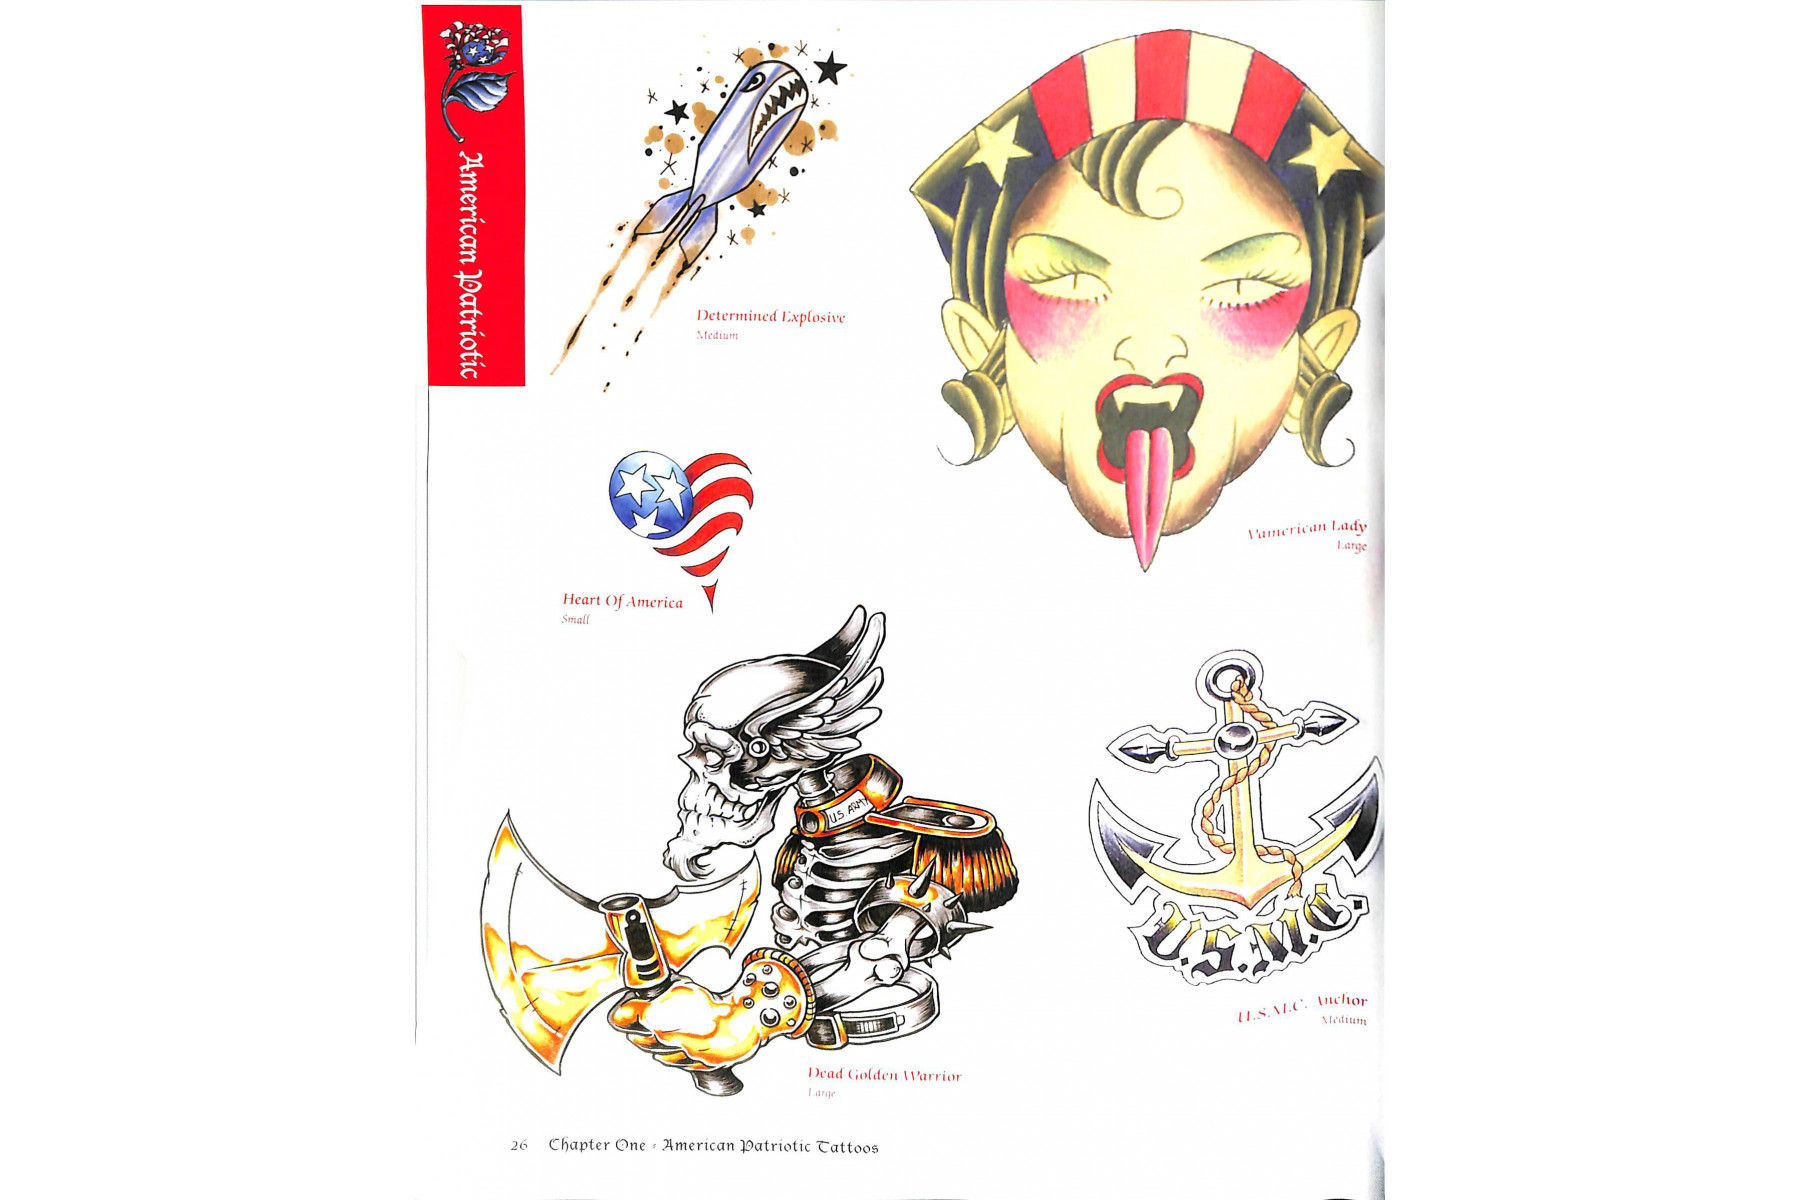 Tattoo Sourcebook: Pick and Choose from Thousands of the Hottest Tattoo Designs